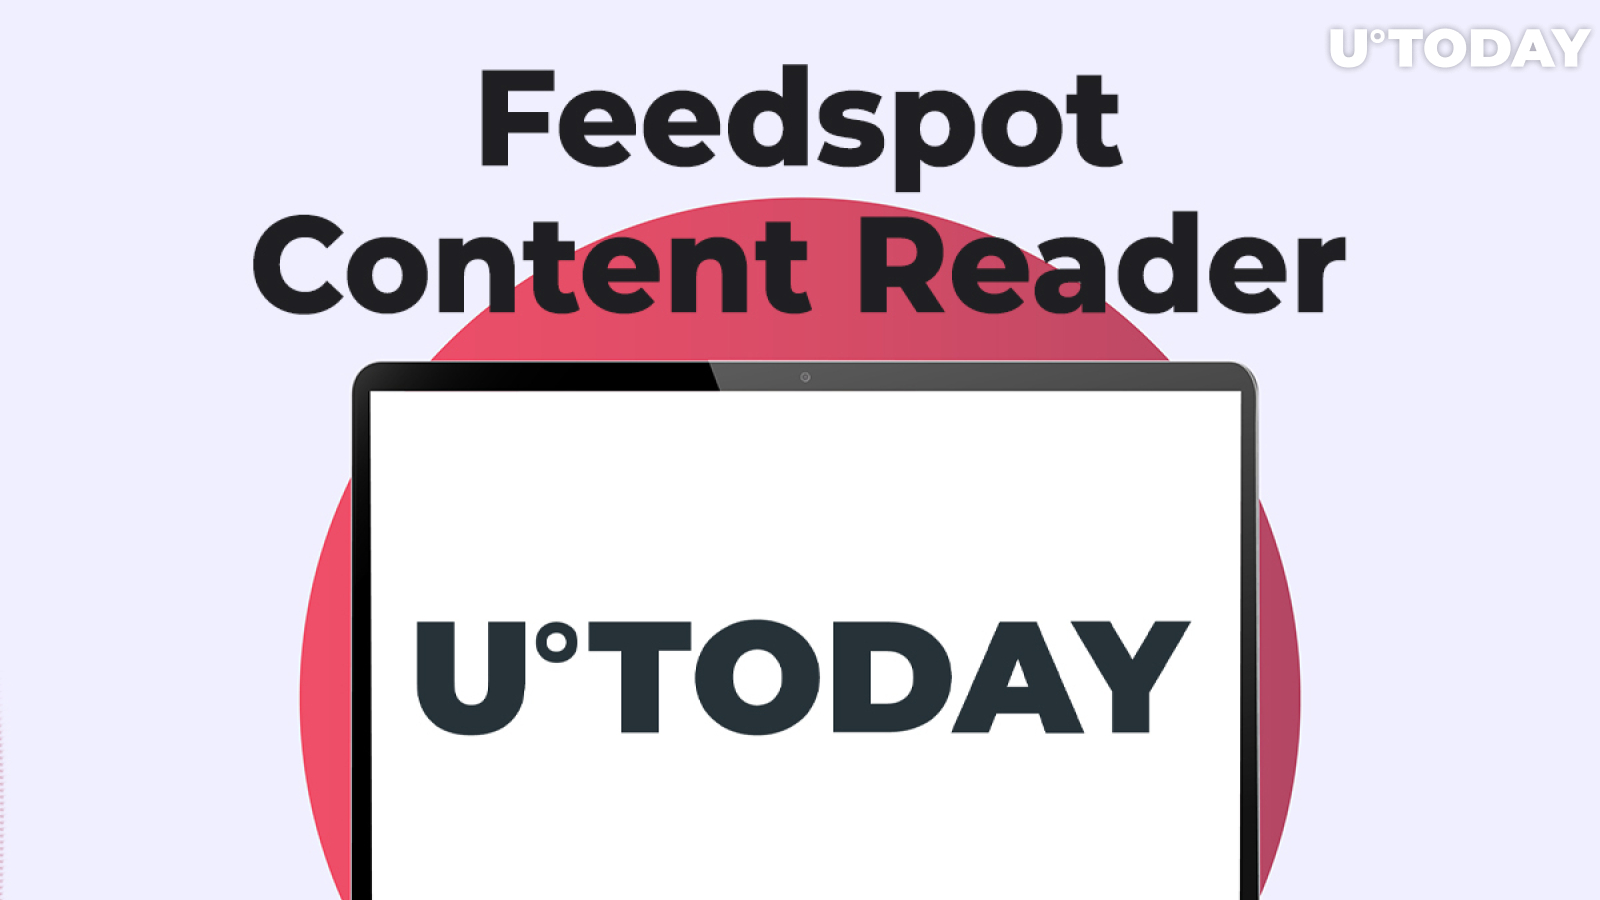 Feedspot Content Reader Now Broadcasts U.Today News on Crypto and Blockchain